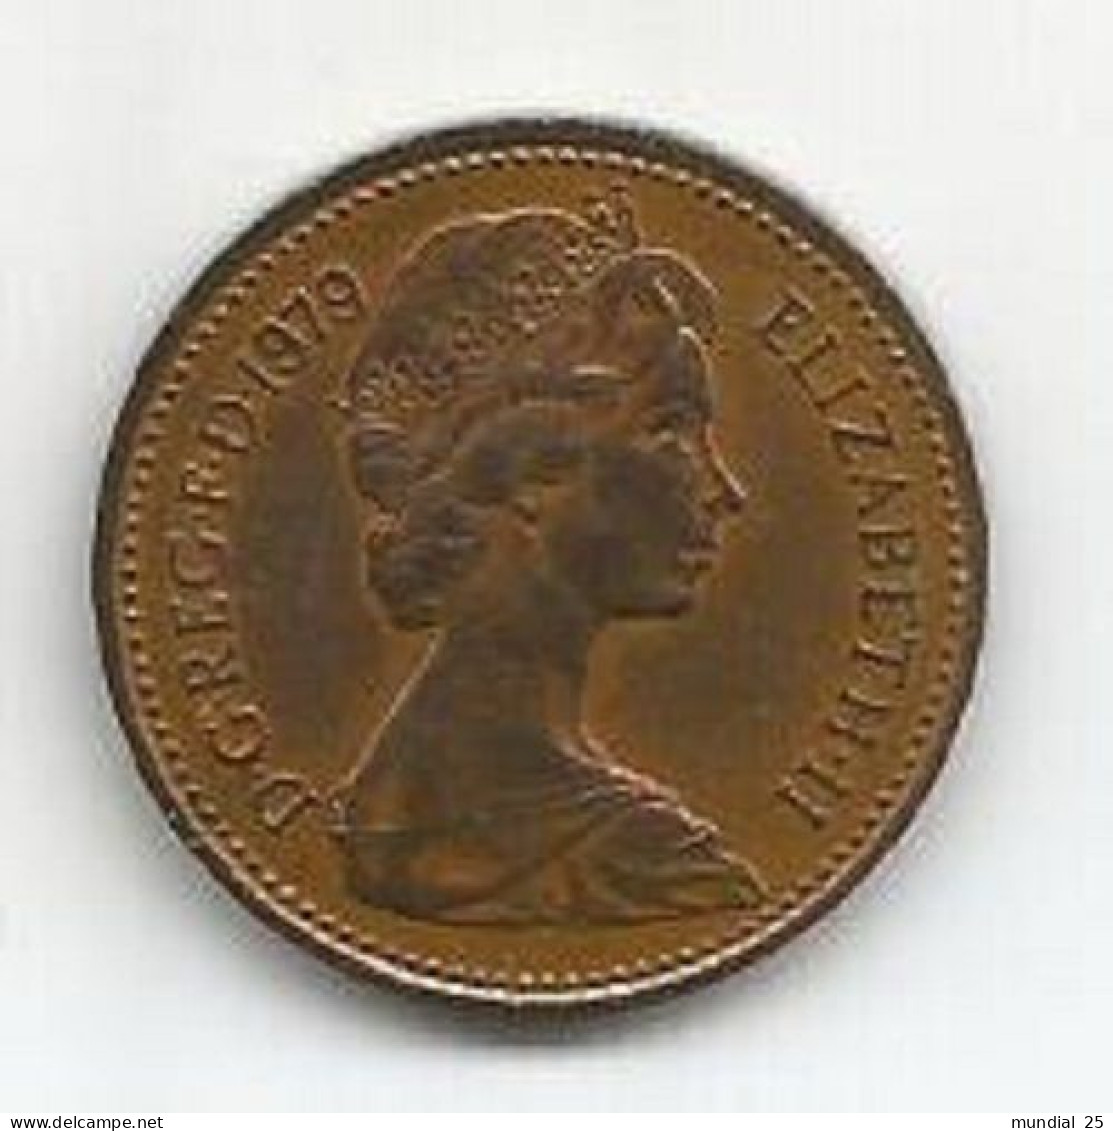 GREAT BRITAIN 1 NEW PENNY 1979 - 1 Penny & 1 New Penny